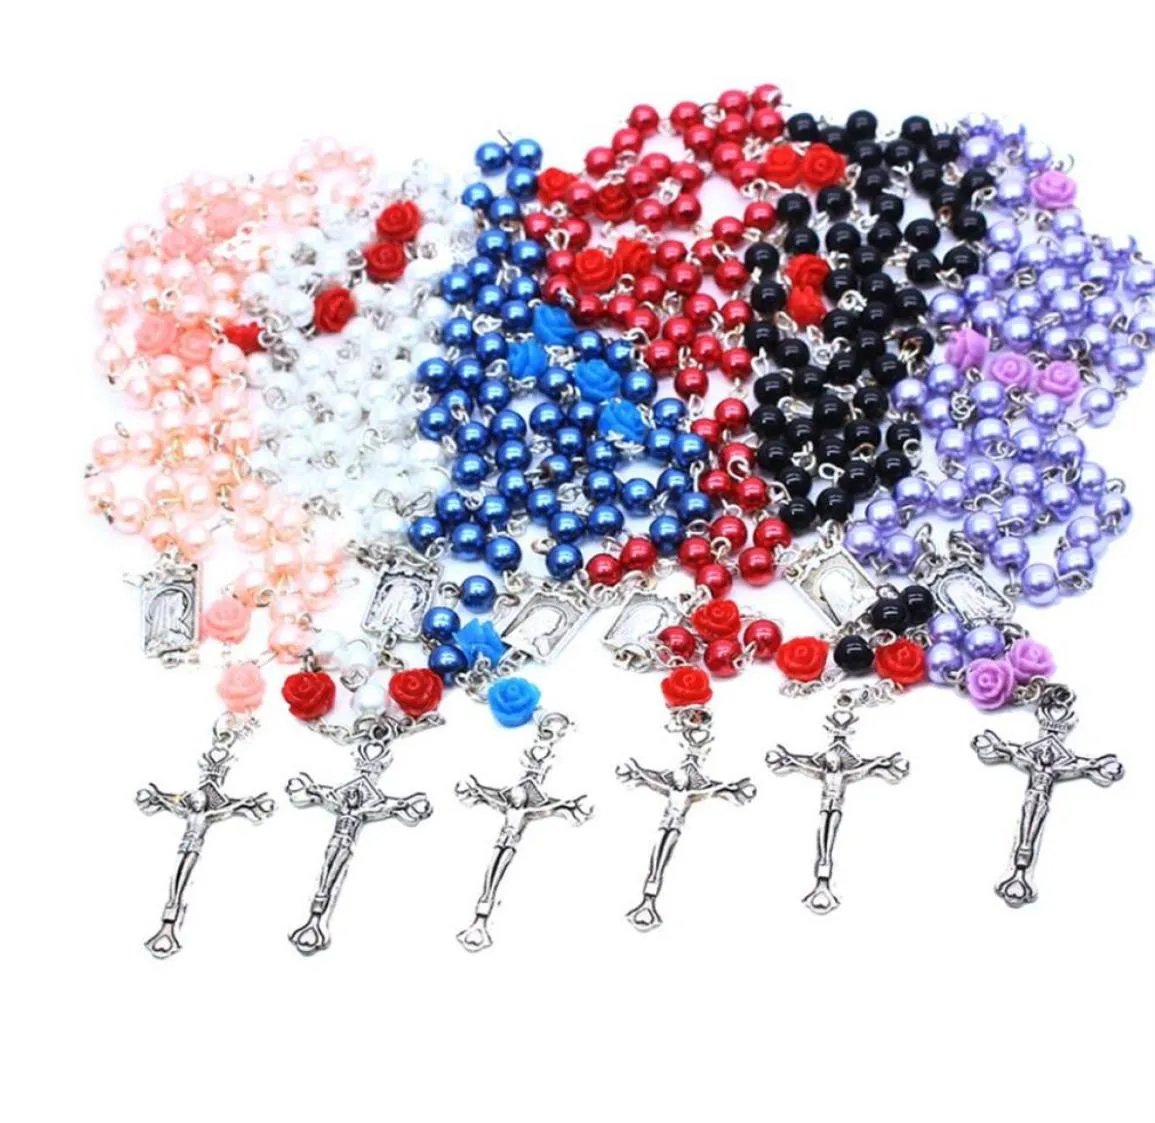 Rose pearl rosary Cross pendants necklaces Beads vine long style sweater chain Catholic Jesus jewelry Mix 6 color 12pcs7646645